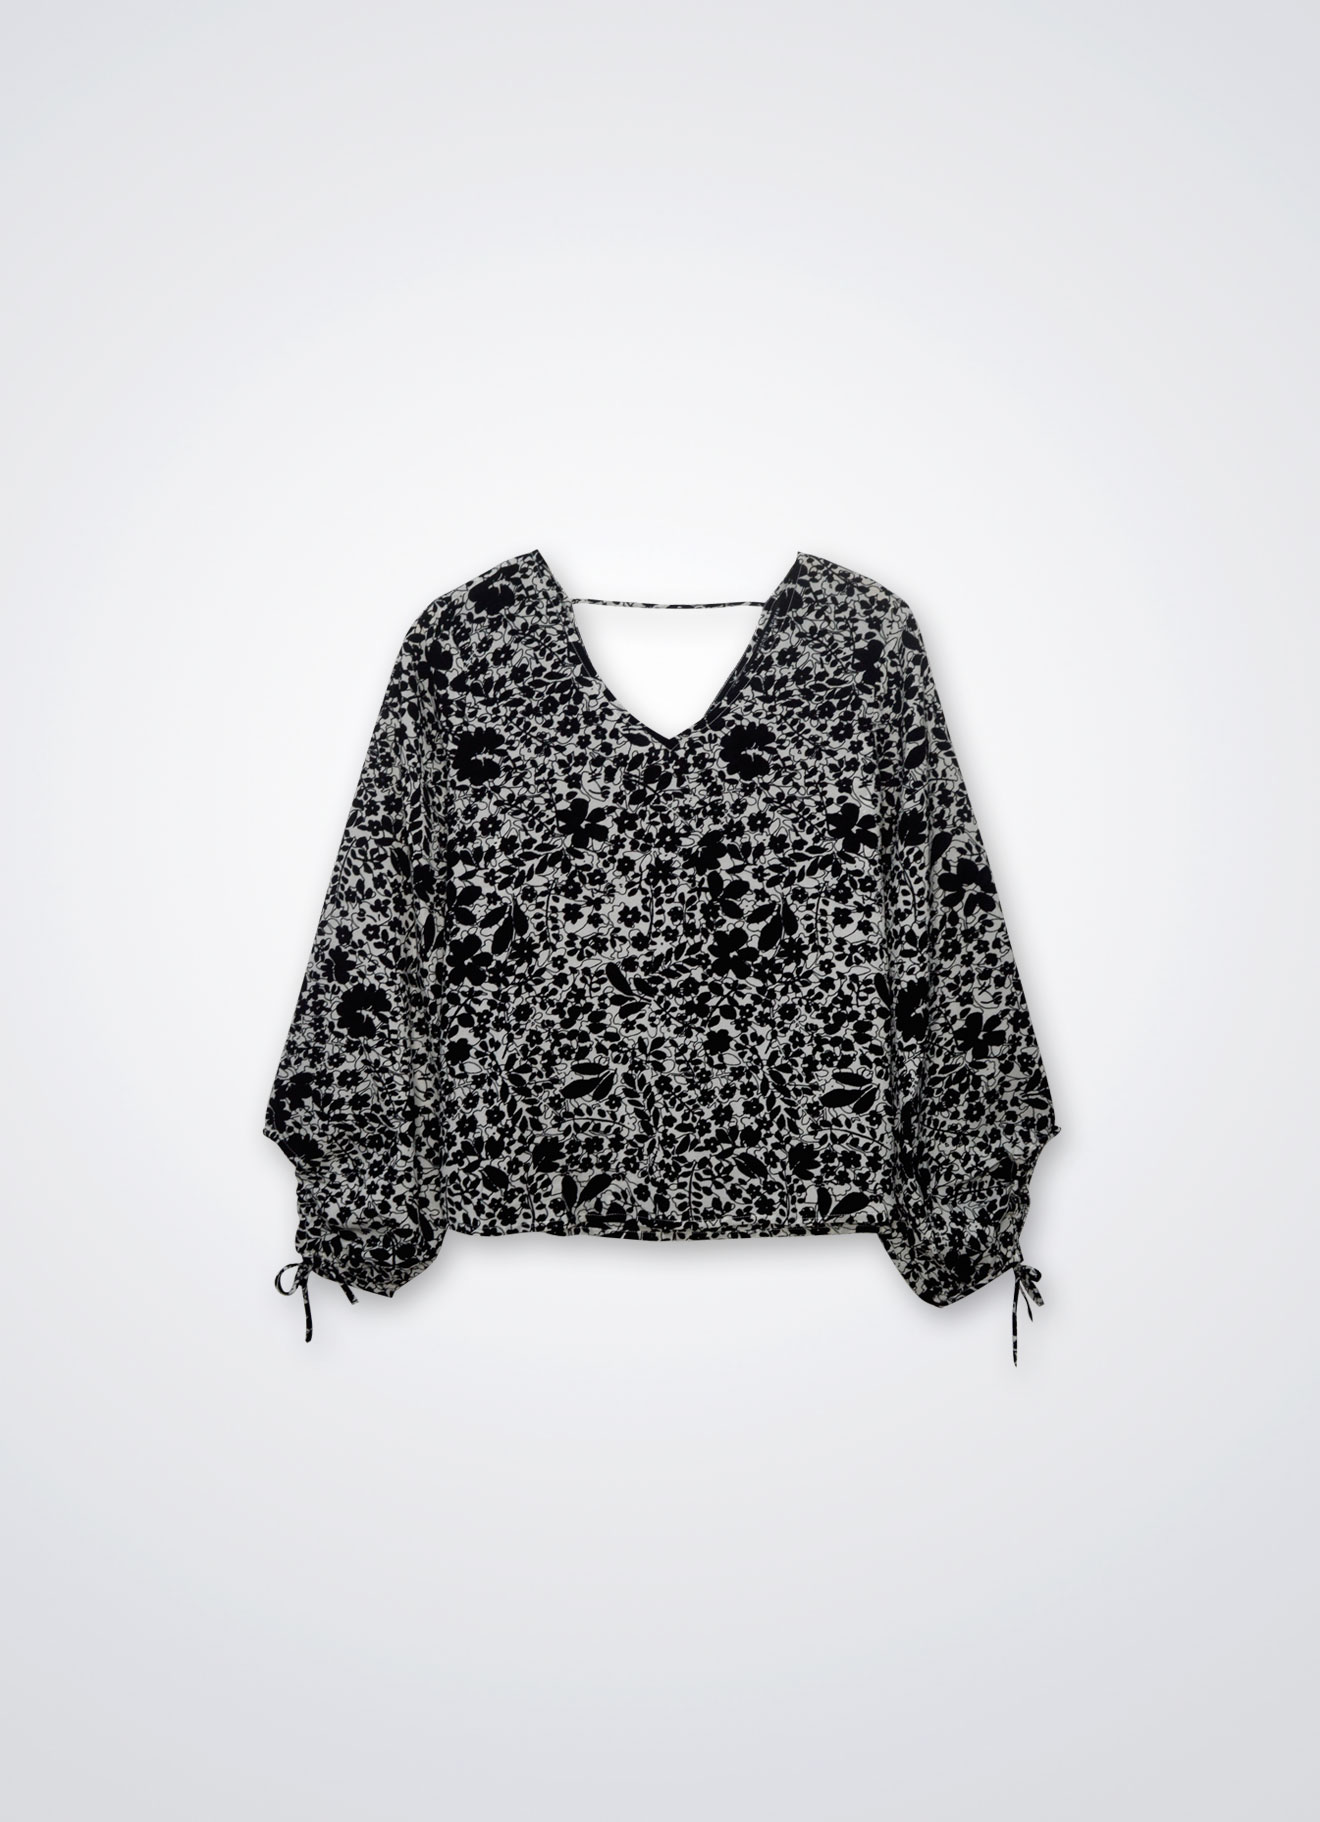 Anthracite by Floral Printed Top